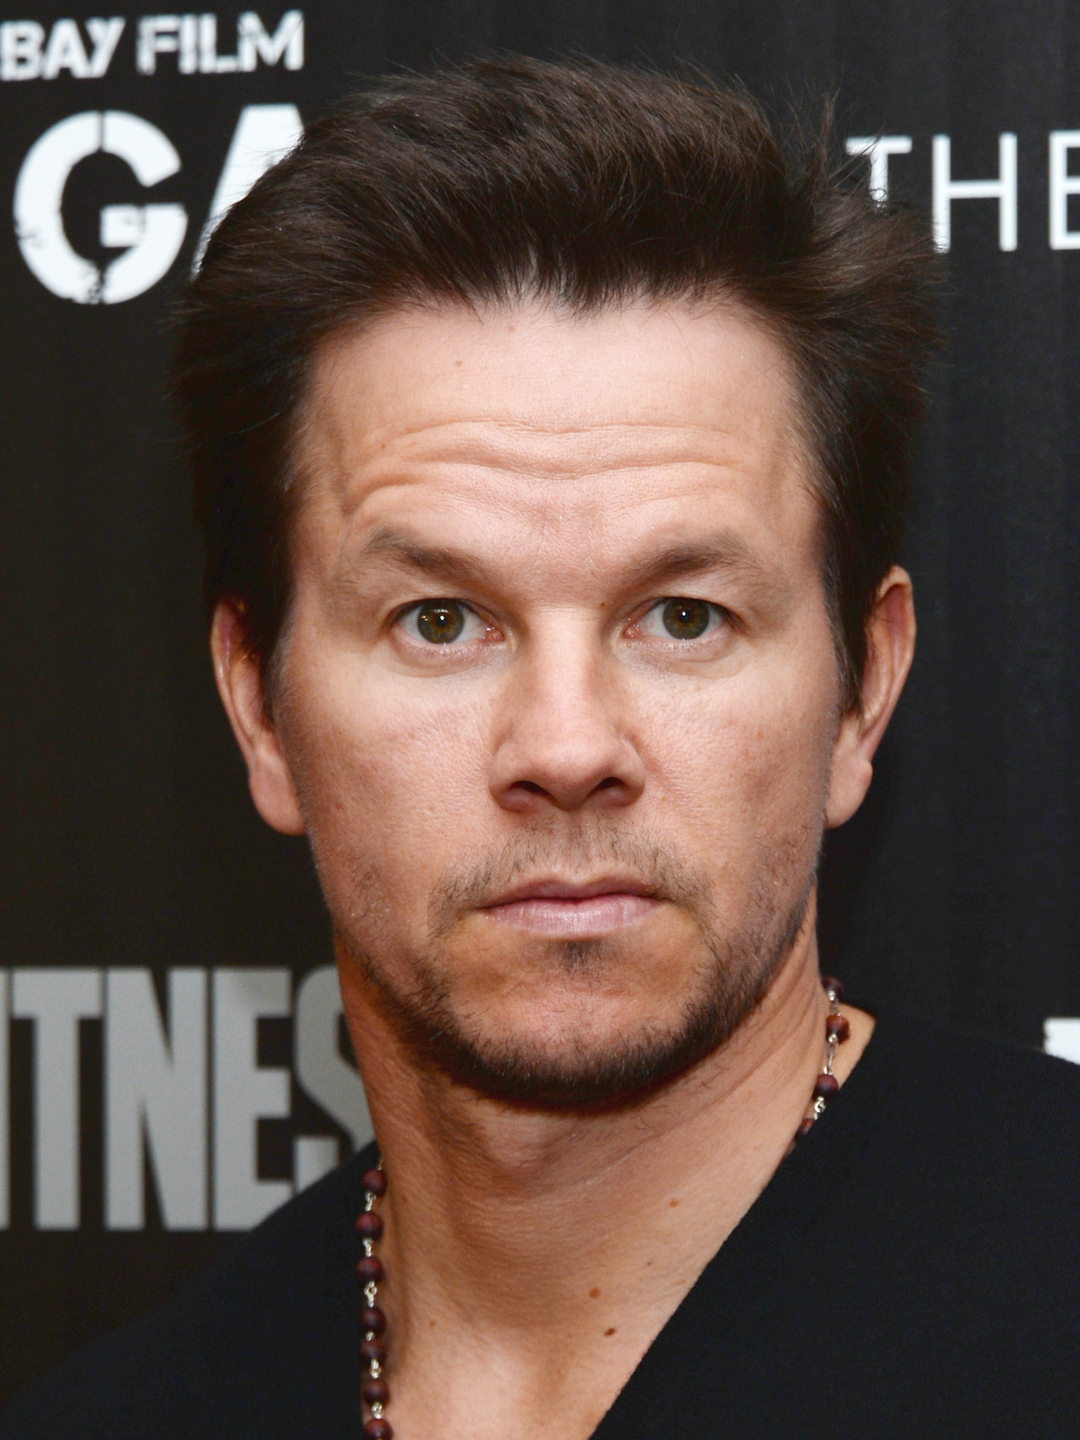 Mark Wahlberg personal traits